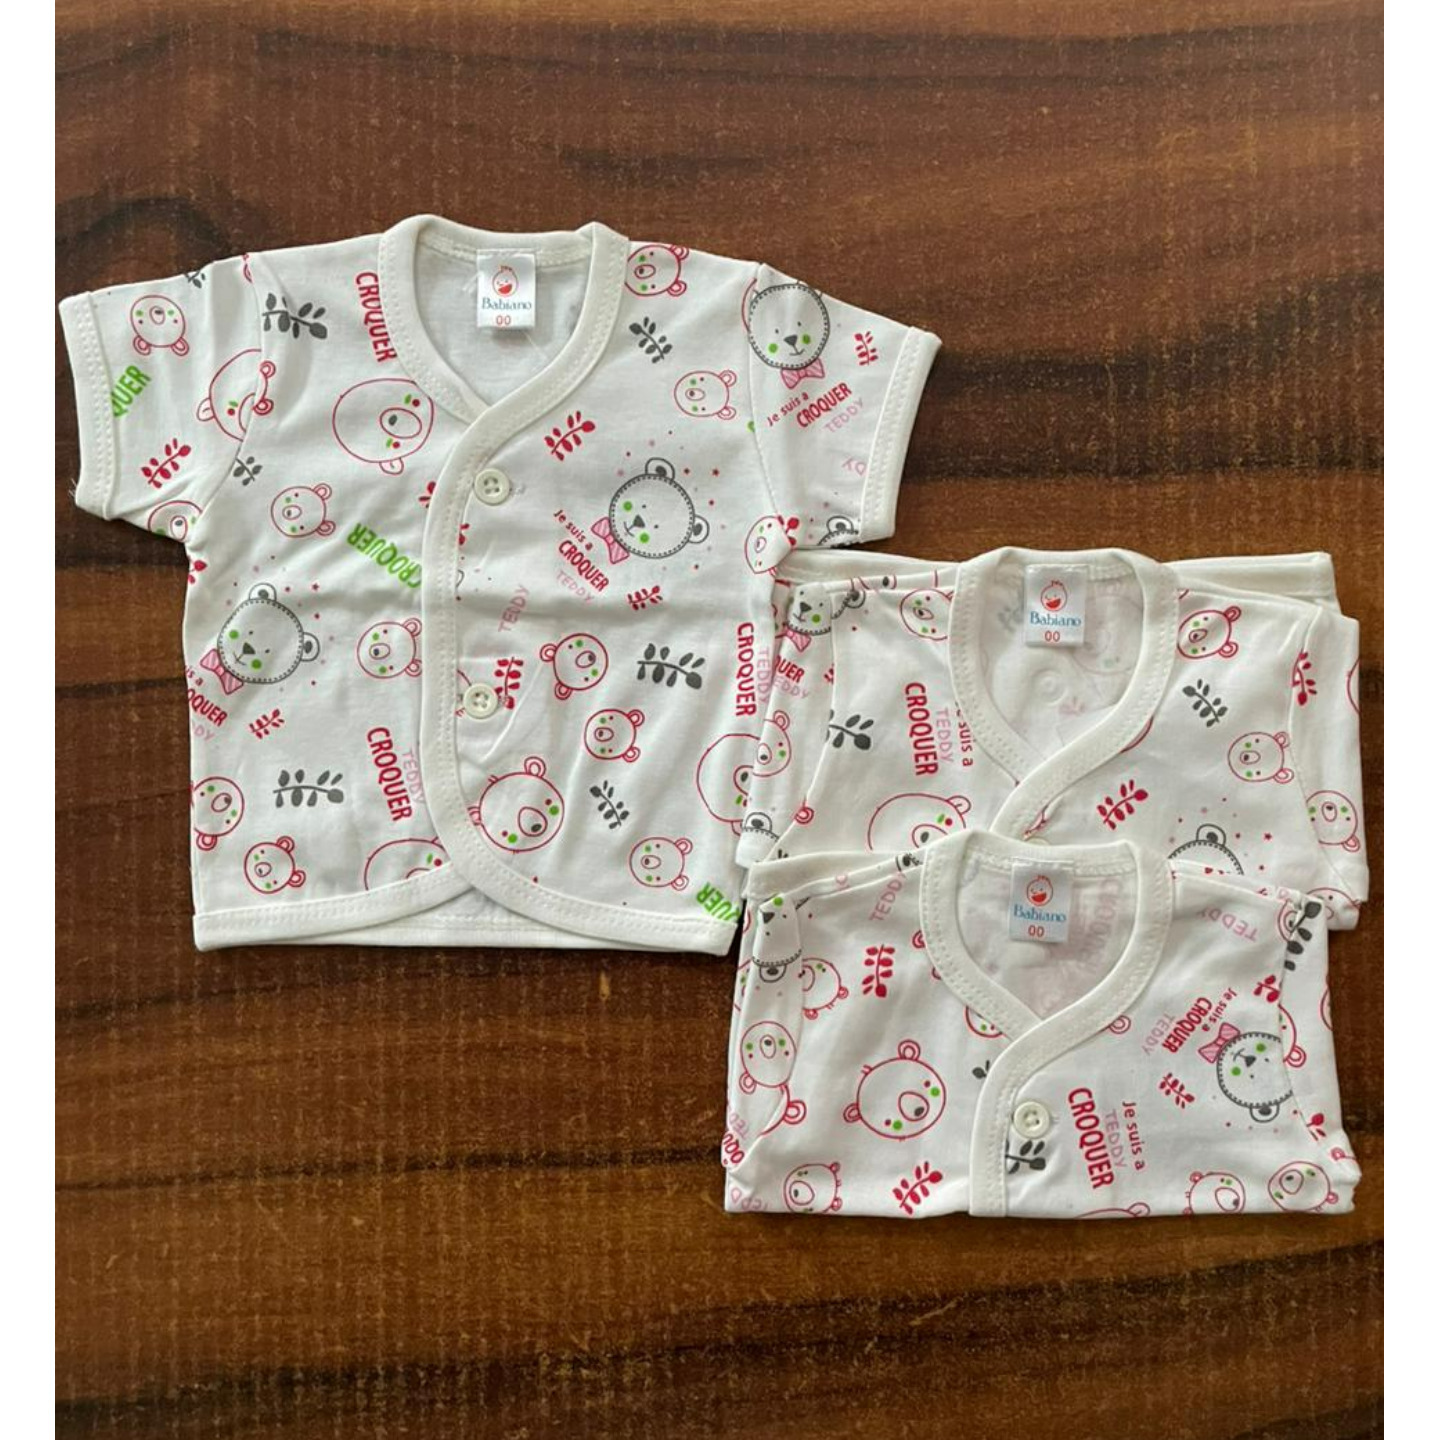 Babiano Full Sleeves Set Rs 460 Only Pre Mature Size Newborn Premie Pack of 3